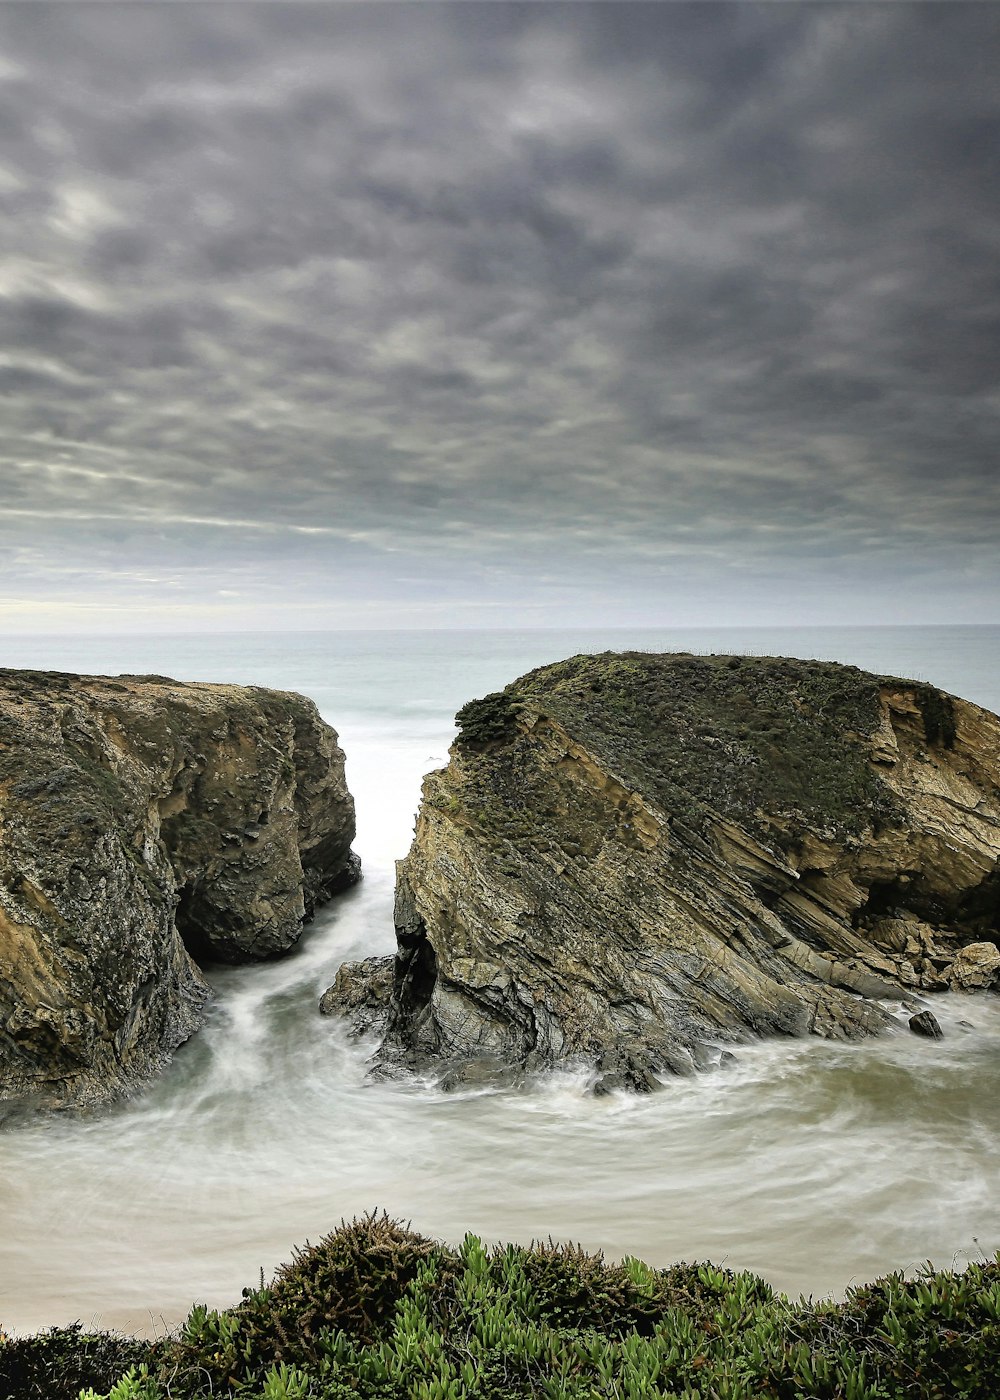 brown rock formation on sea under gray clouds